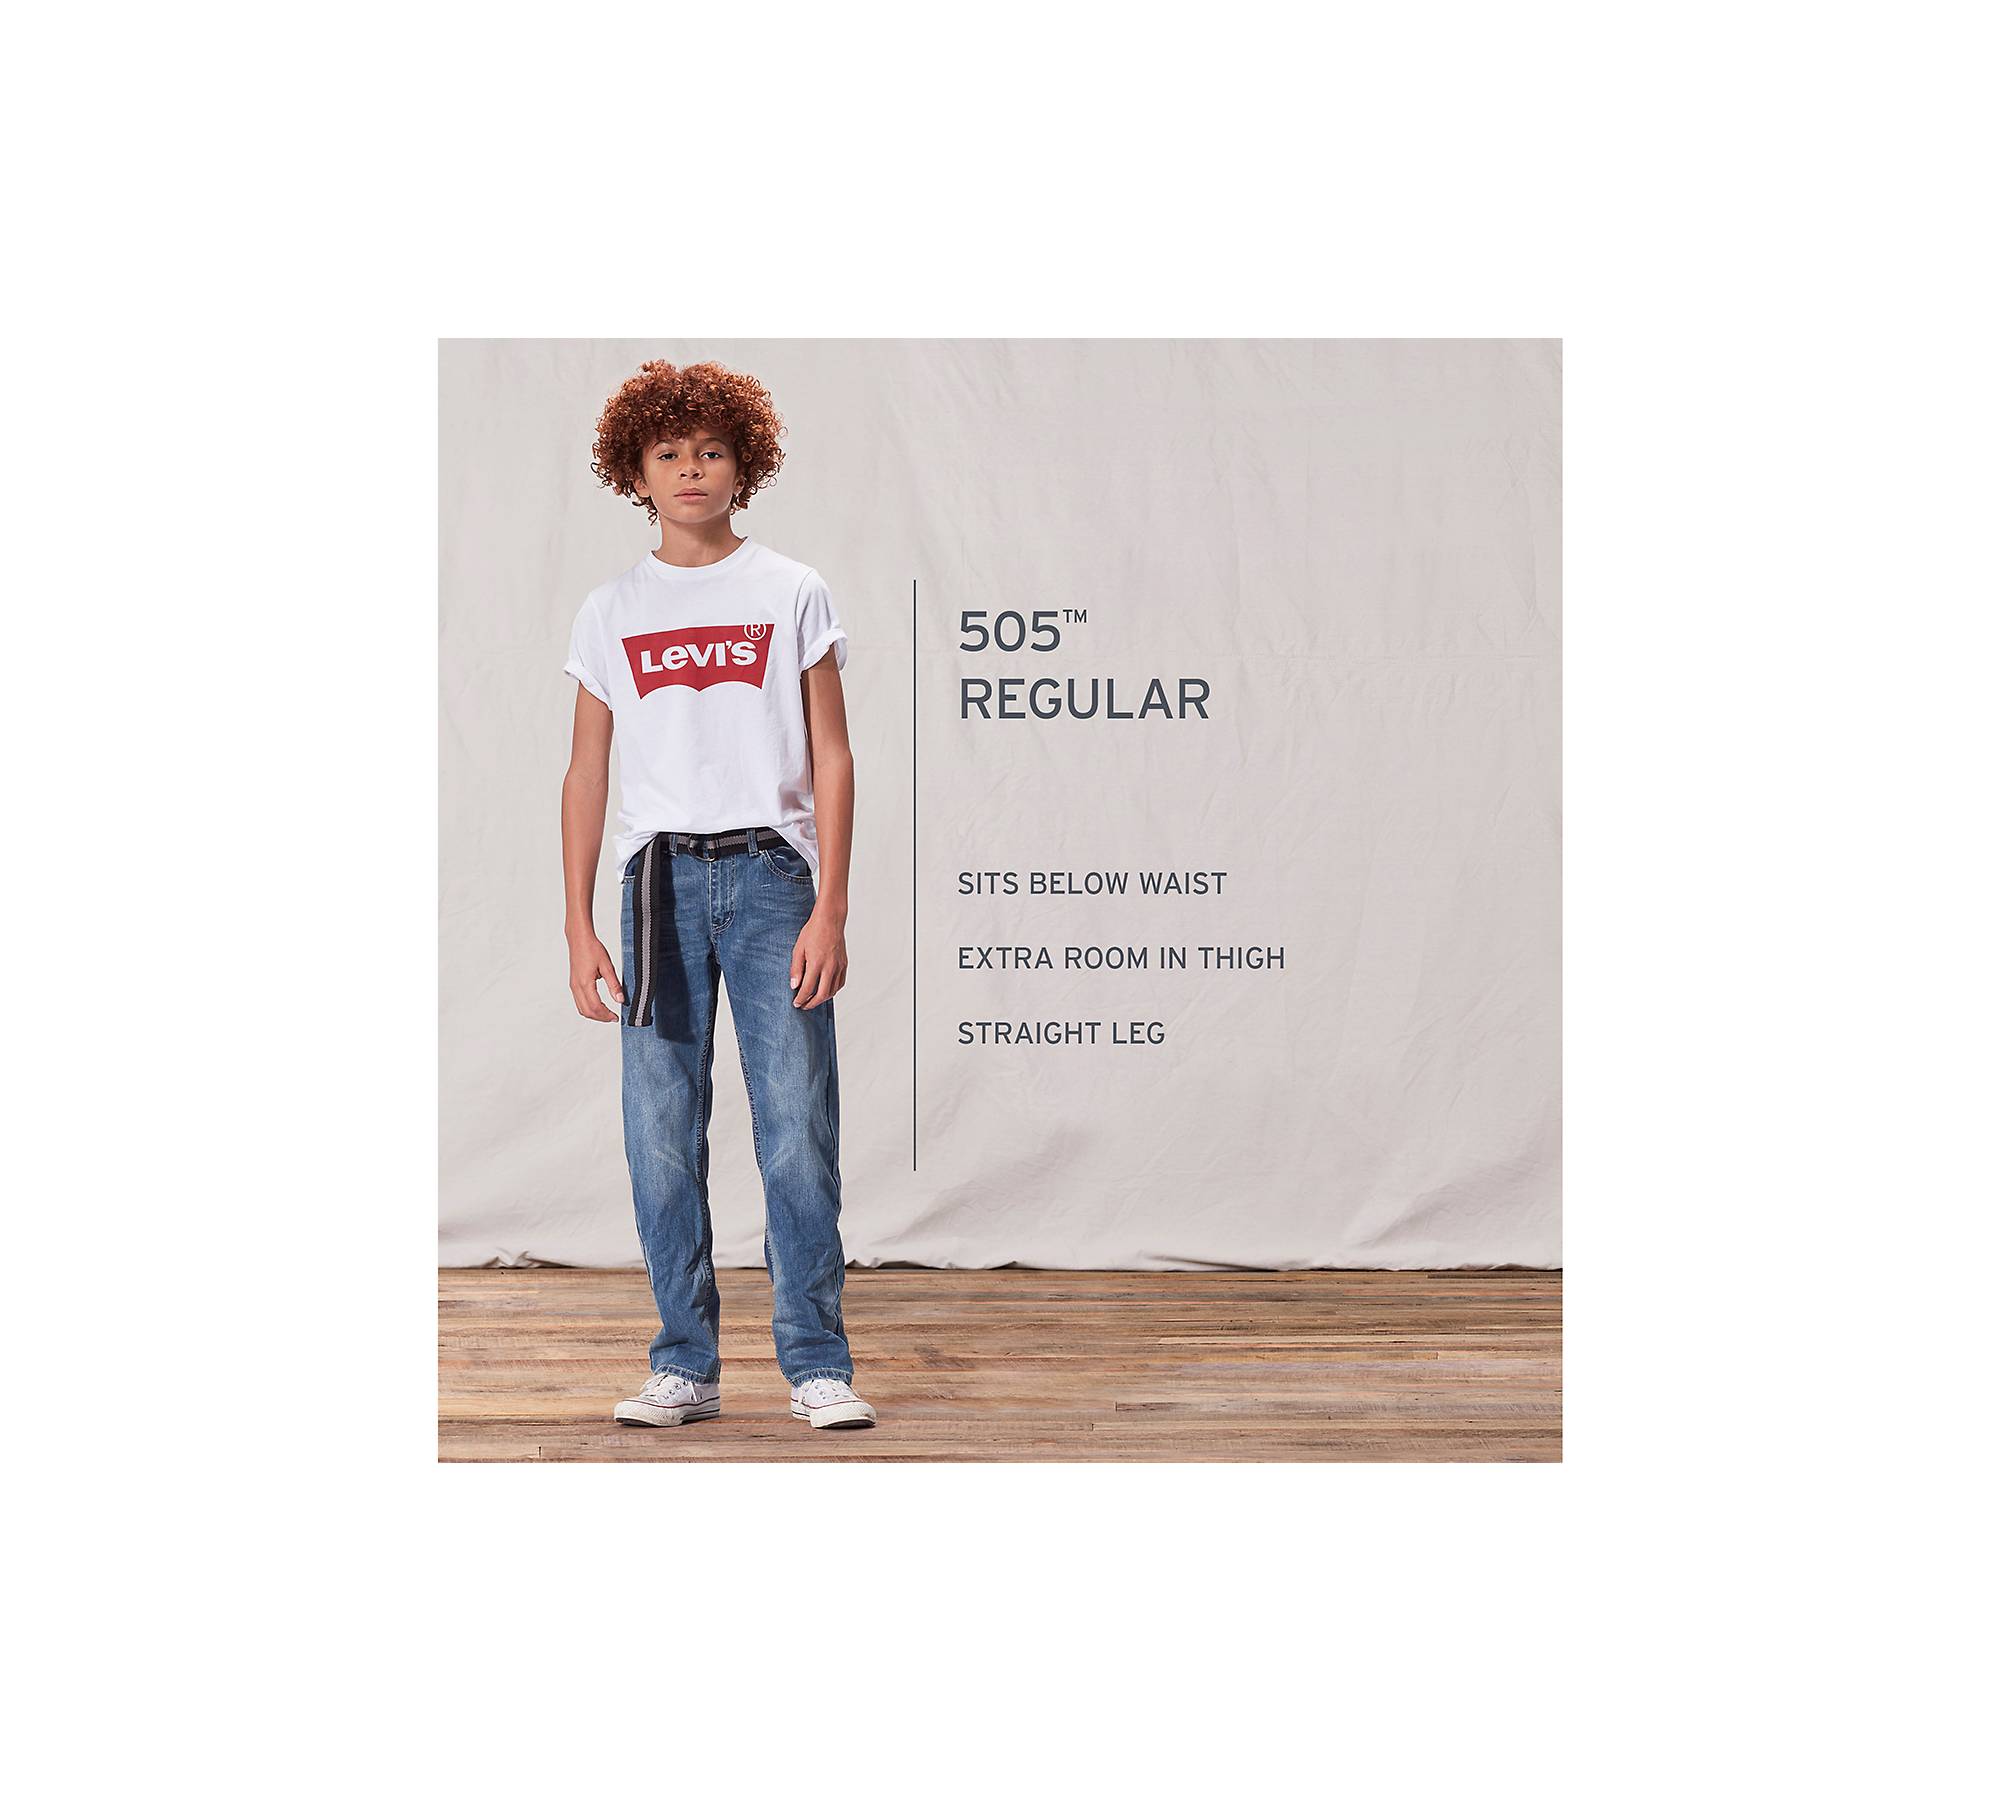 New Arrival Big Boys Jeans Trousers Spring 2020 Teen Boys Pants